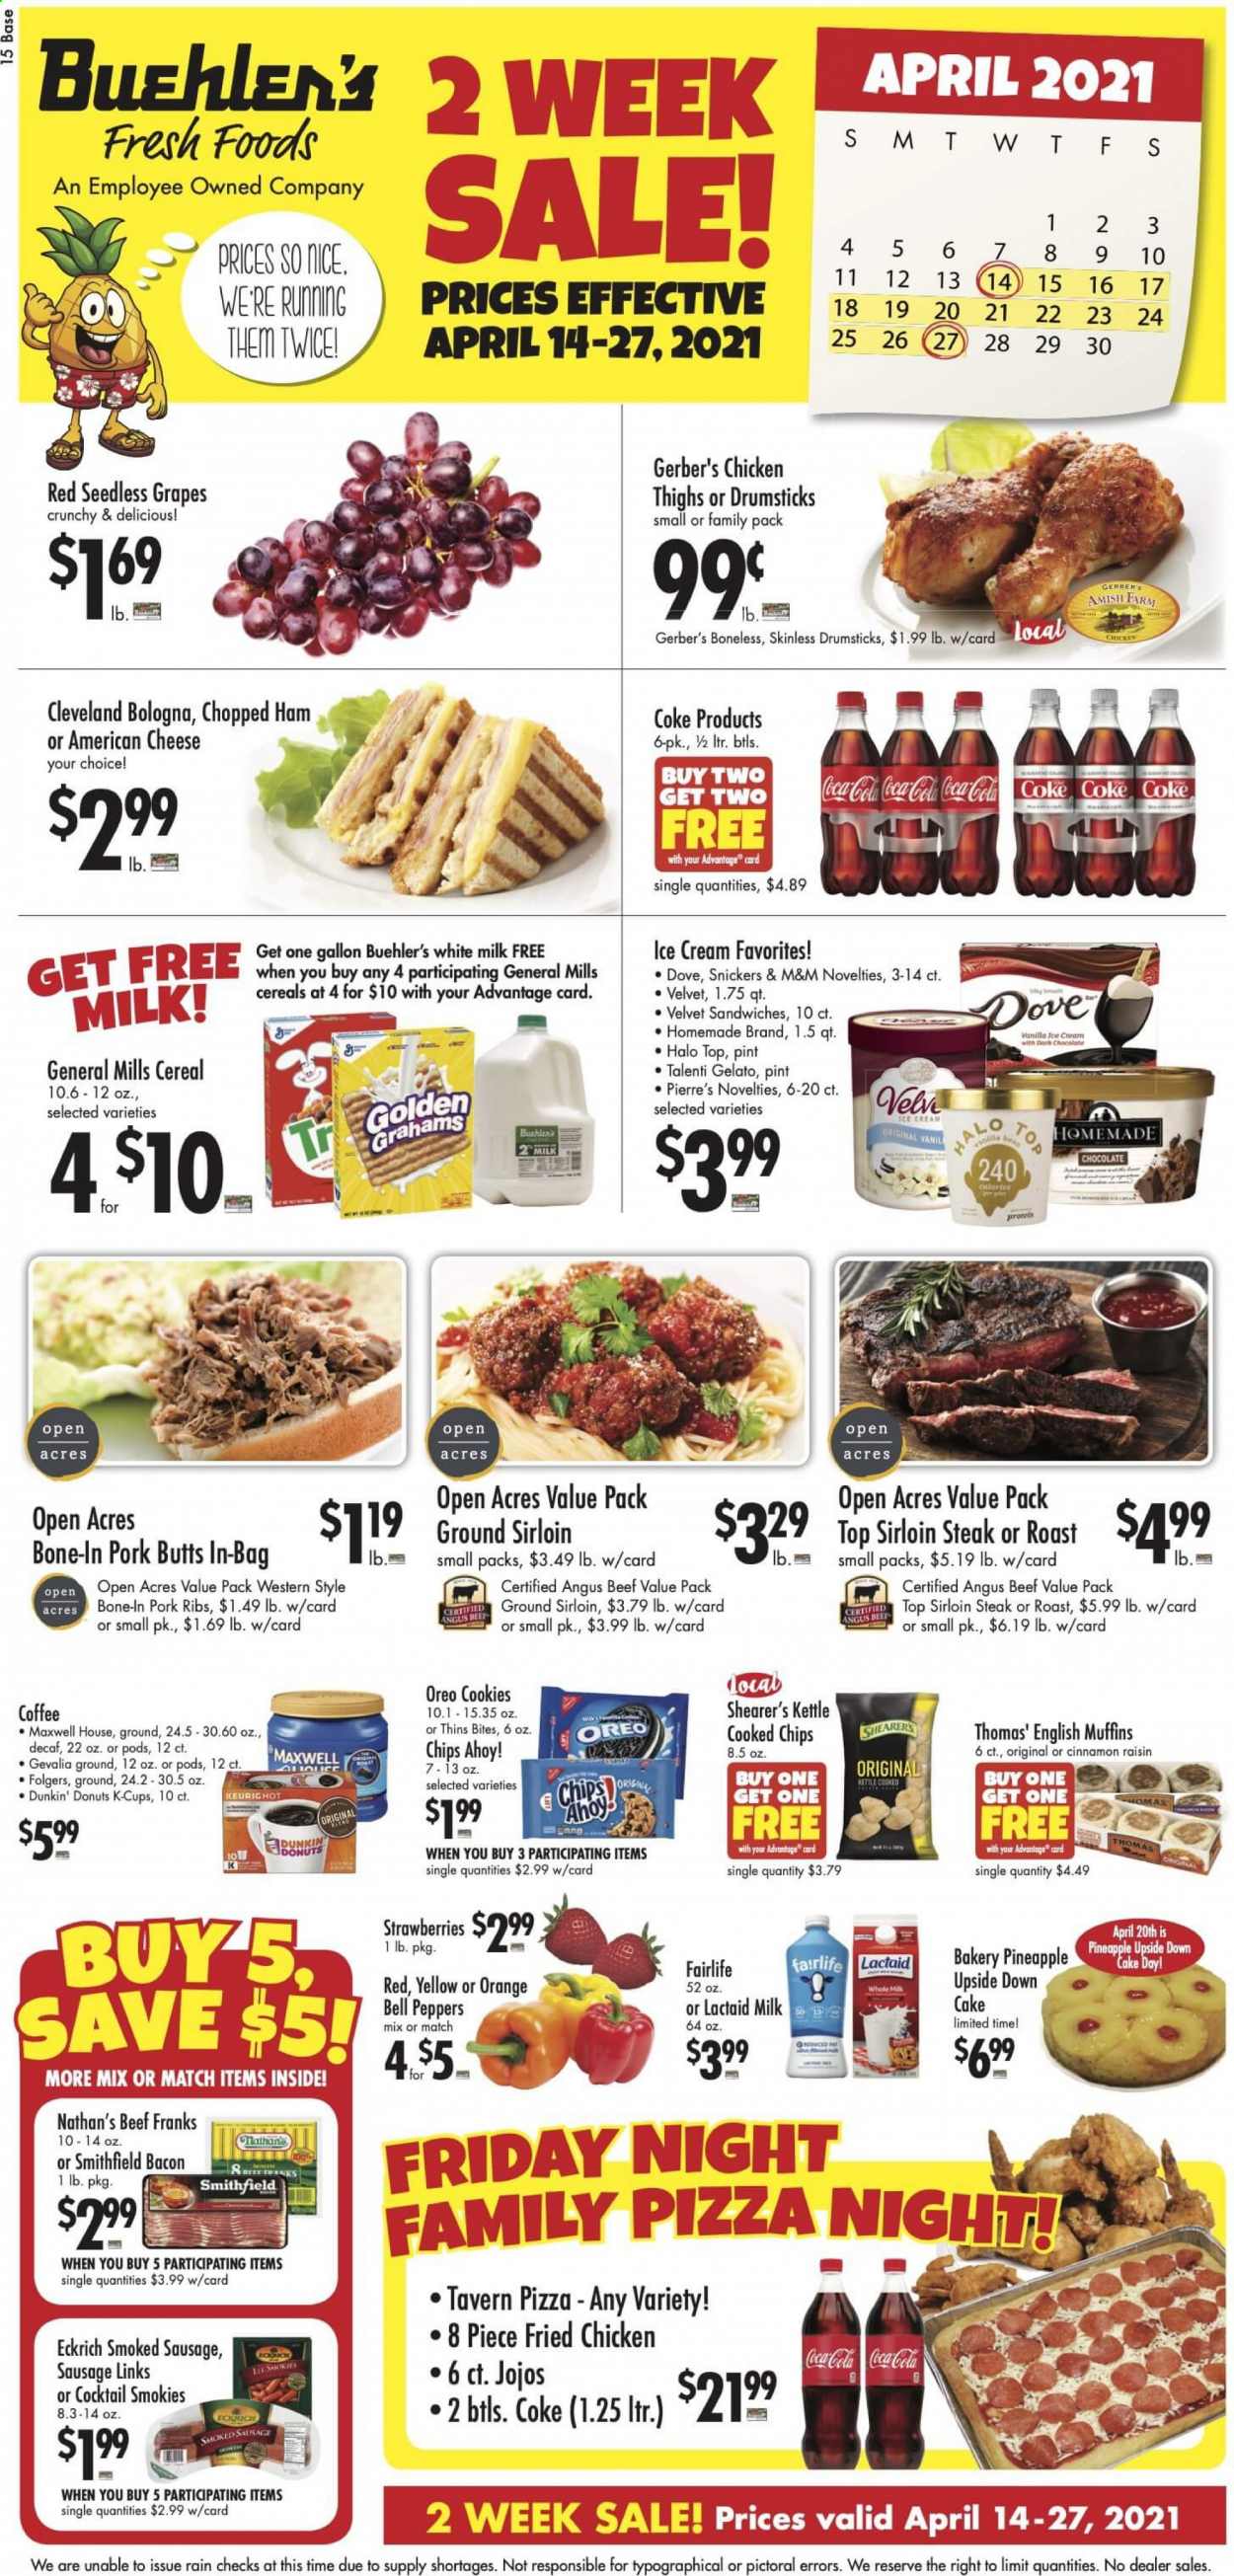 thumbnail - Buehler's Flyer - 04/14/2021 - 04/27/2021 - Sales products - seedless grapes, english muffins, cake, donut, Dunkin' Donuts, bell peppers, grapes, strawberries, oranges, pizza, fried chicken, bacon, ham, bologna sausage, sausage, smoked sausage, american cheese, Lactaid, Oreo, ice cream, Talenti Gelato, gelato, family pizza, cookies, milk chocolate, chocolate, Snickers, M&M's, dark chocolate, Chips Ahoy!, Shearer’s, Gerber, chips, Thins, cereals, raisins, Coca-Cola, Maxwell House, coffee, Folgers, coffee capsules, K-Cups, Gevalia, beef meat, beef sirloin, steak, sirloin steak, pork meat, pork ribs, mouse, pineapple, peppers. Page 1.